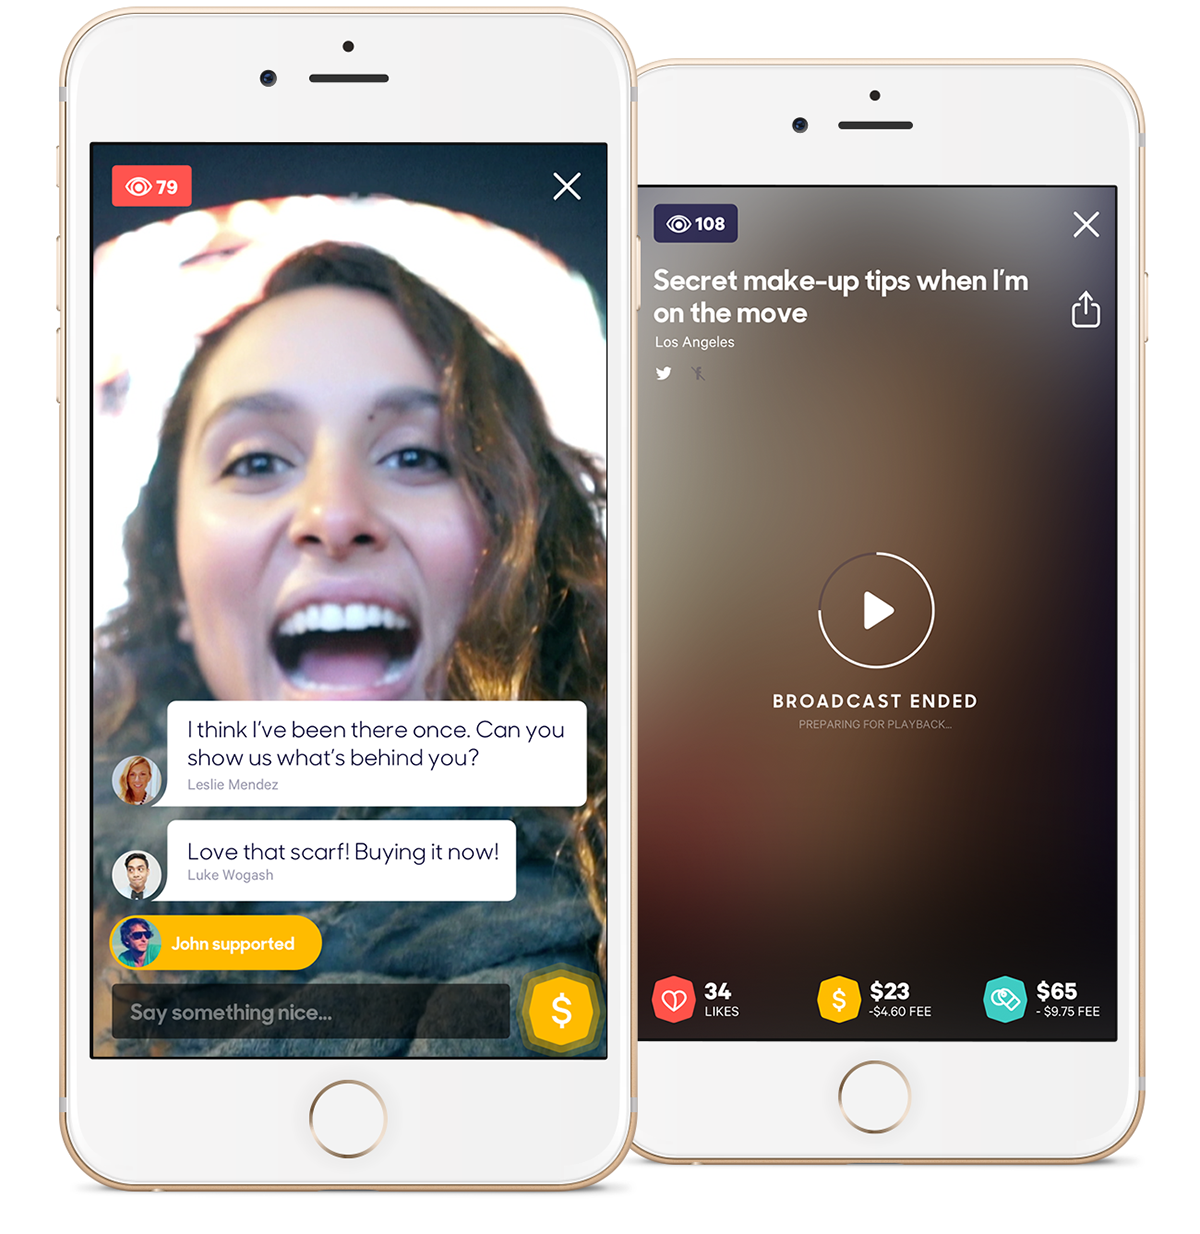 Busker, a video broadcasting app, enables viewers to engage in the stream by chatting, shopping and sending money. (Busker Media Inc.)